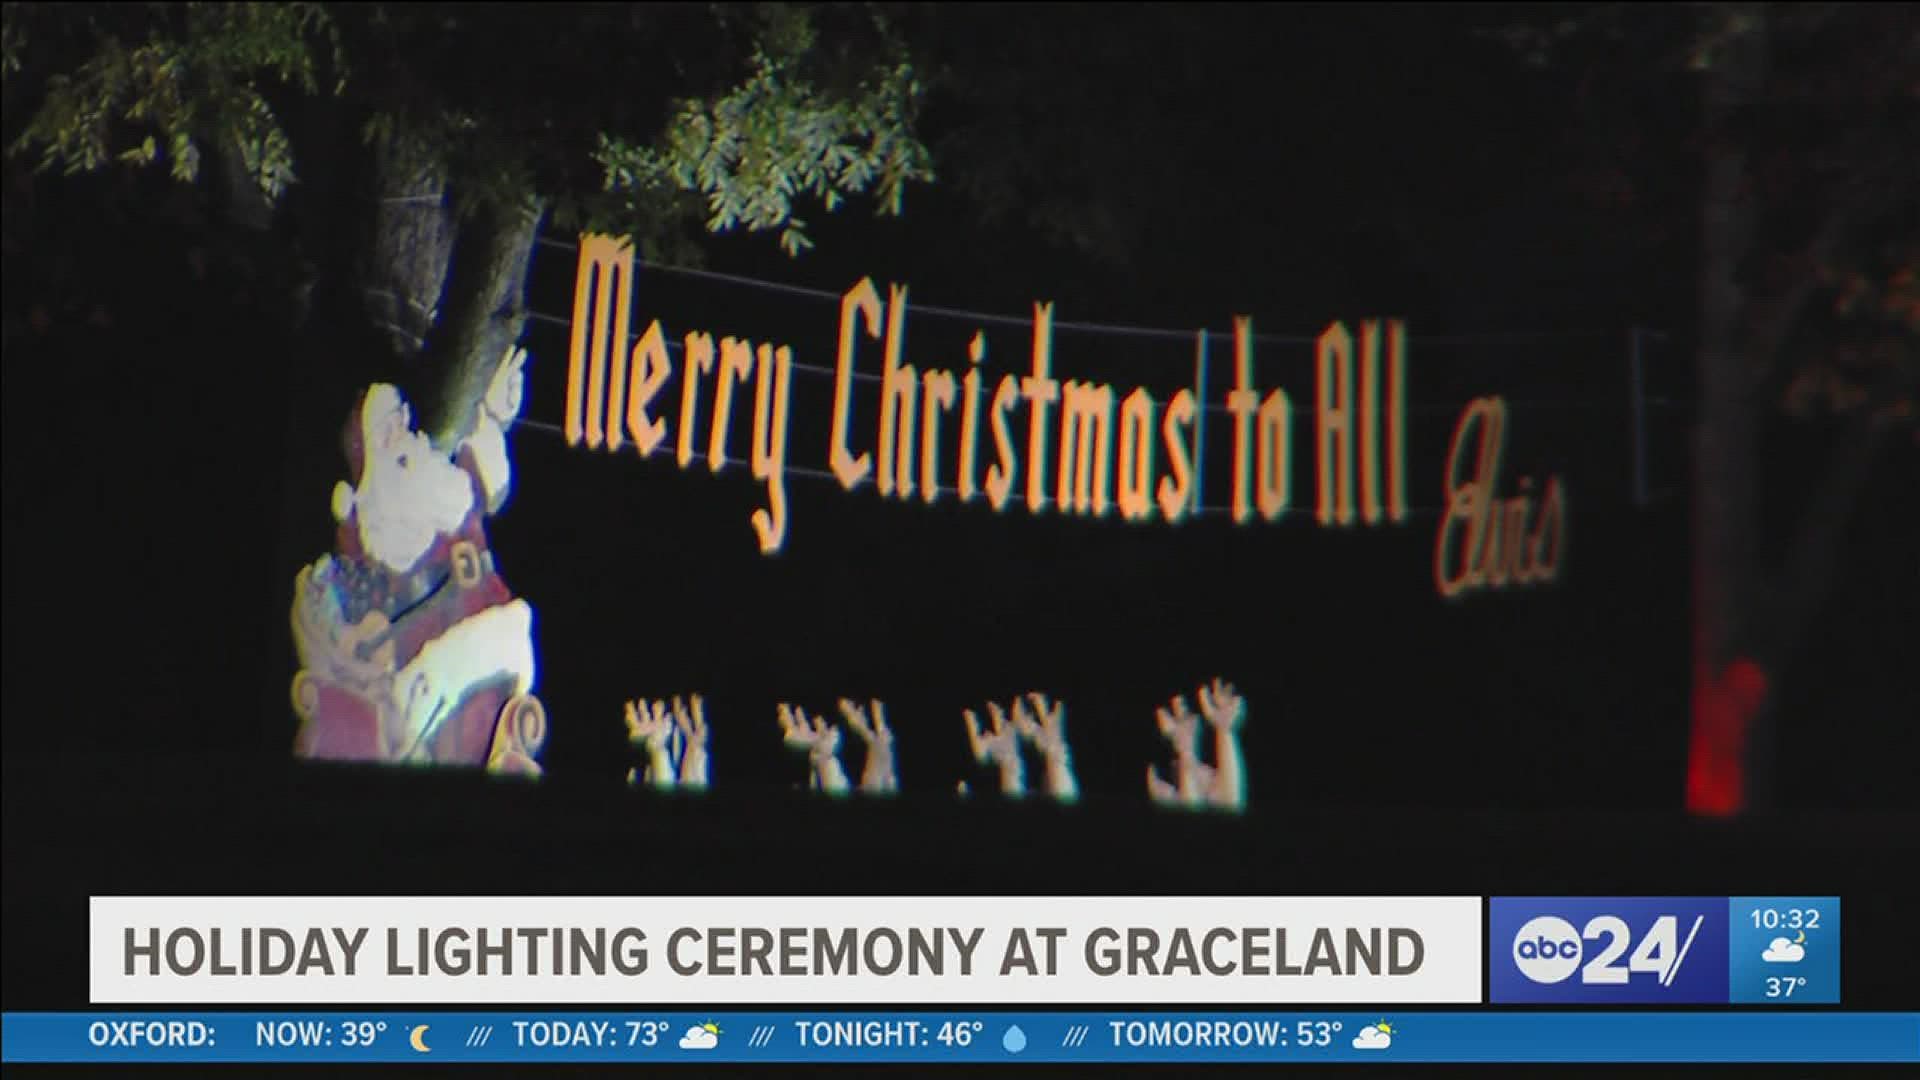 Elvis Presley's Graceland will have the first-ever  Holiday Lighting Weekend celebration November 18-20th